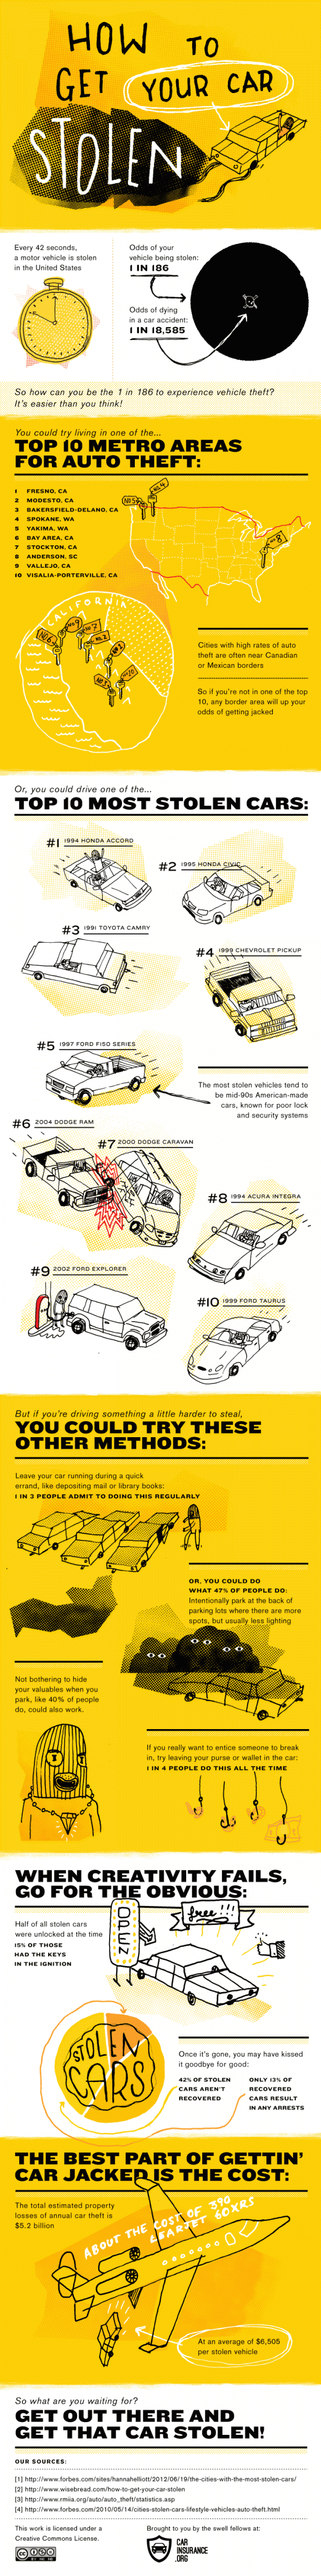 How to steal a car, How Cars are Stolen 